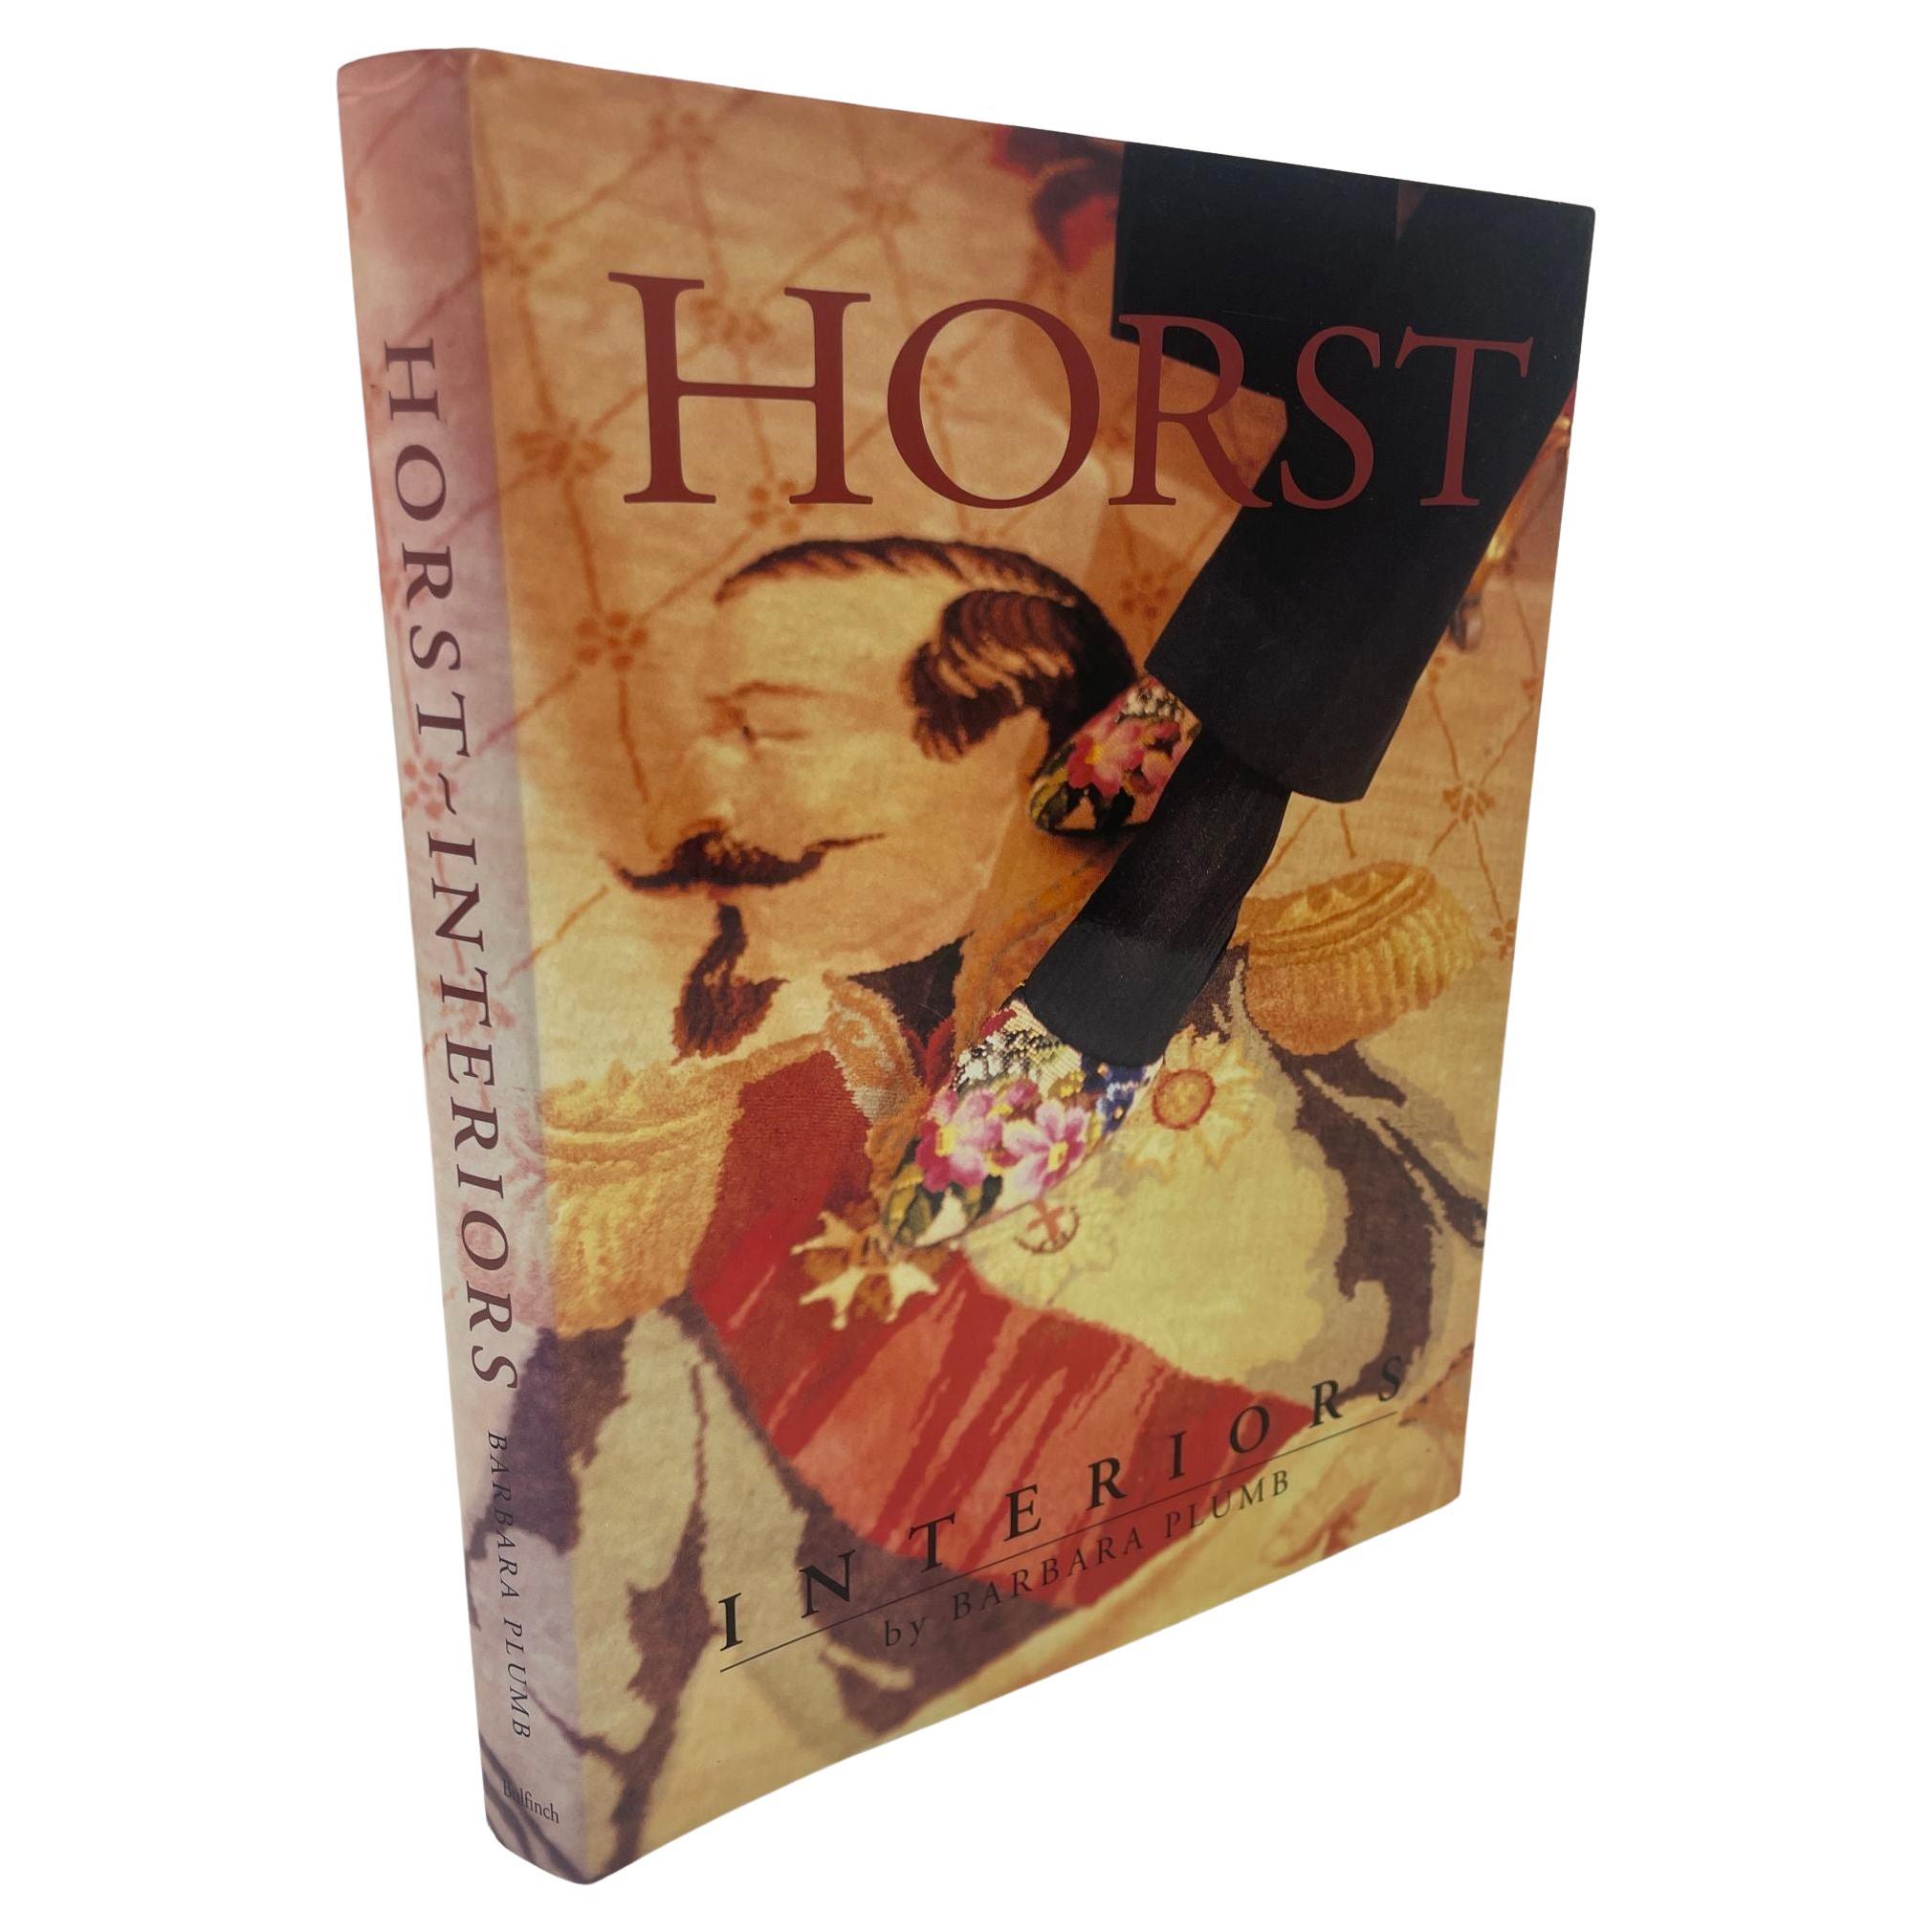 Horst Interiors by Barbara Plumb Hardcover Book 1993 First Edition For Sale